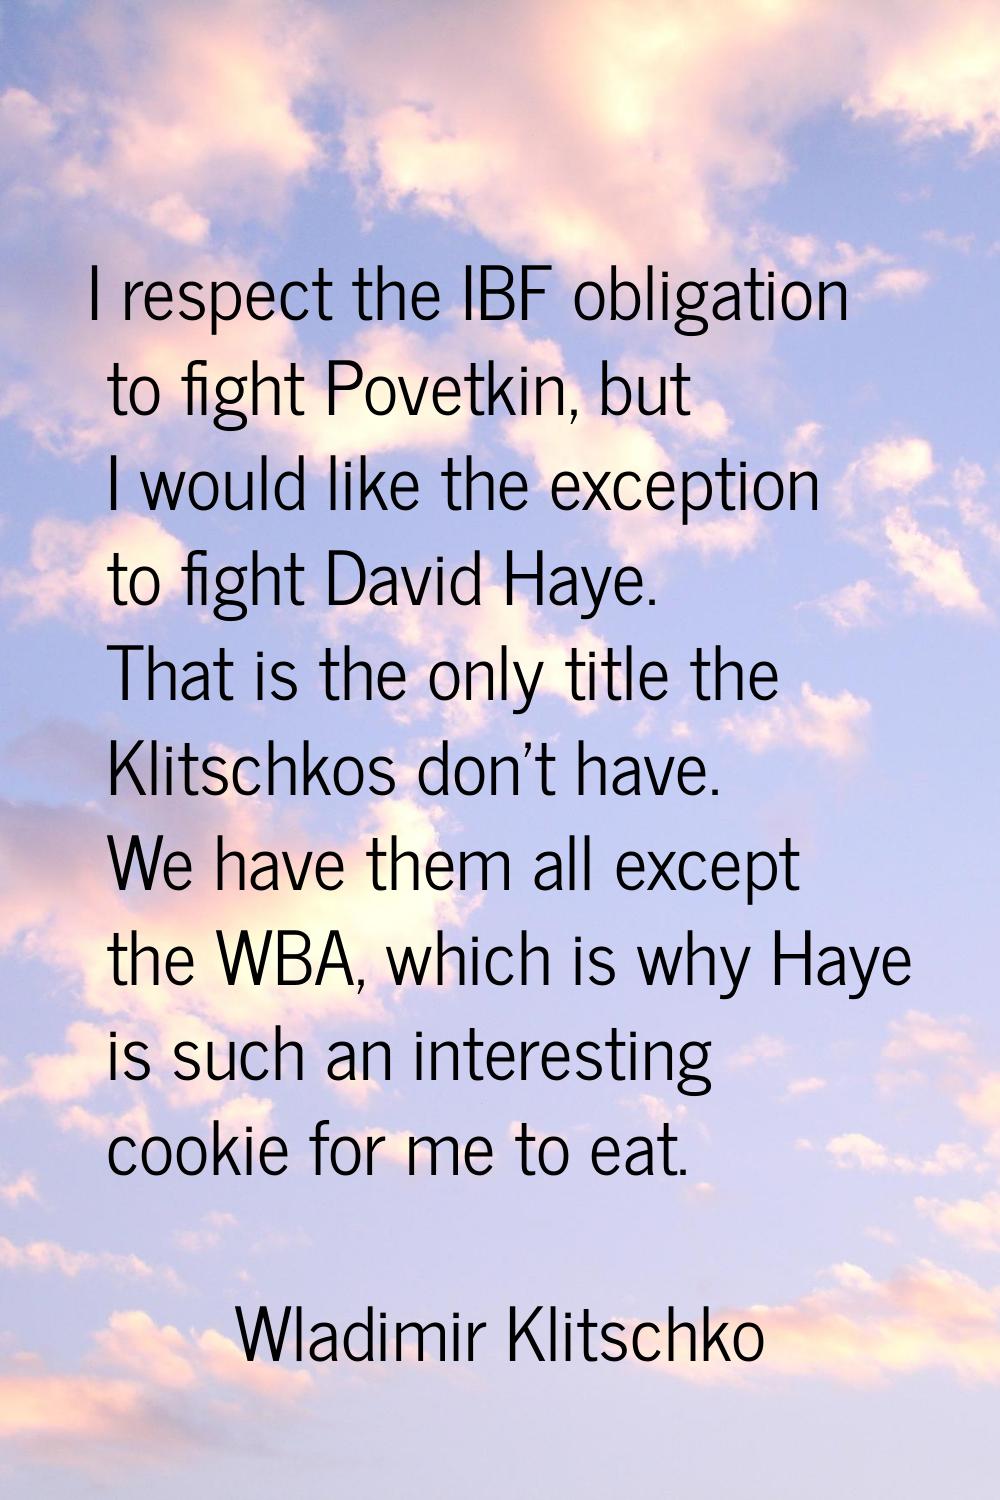 I respect the IBF obligation to fight Povetkin, but I would like the exception to fight David Haye.